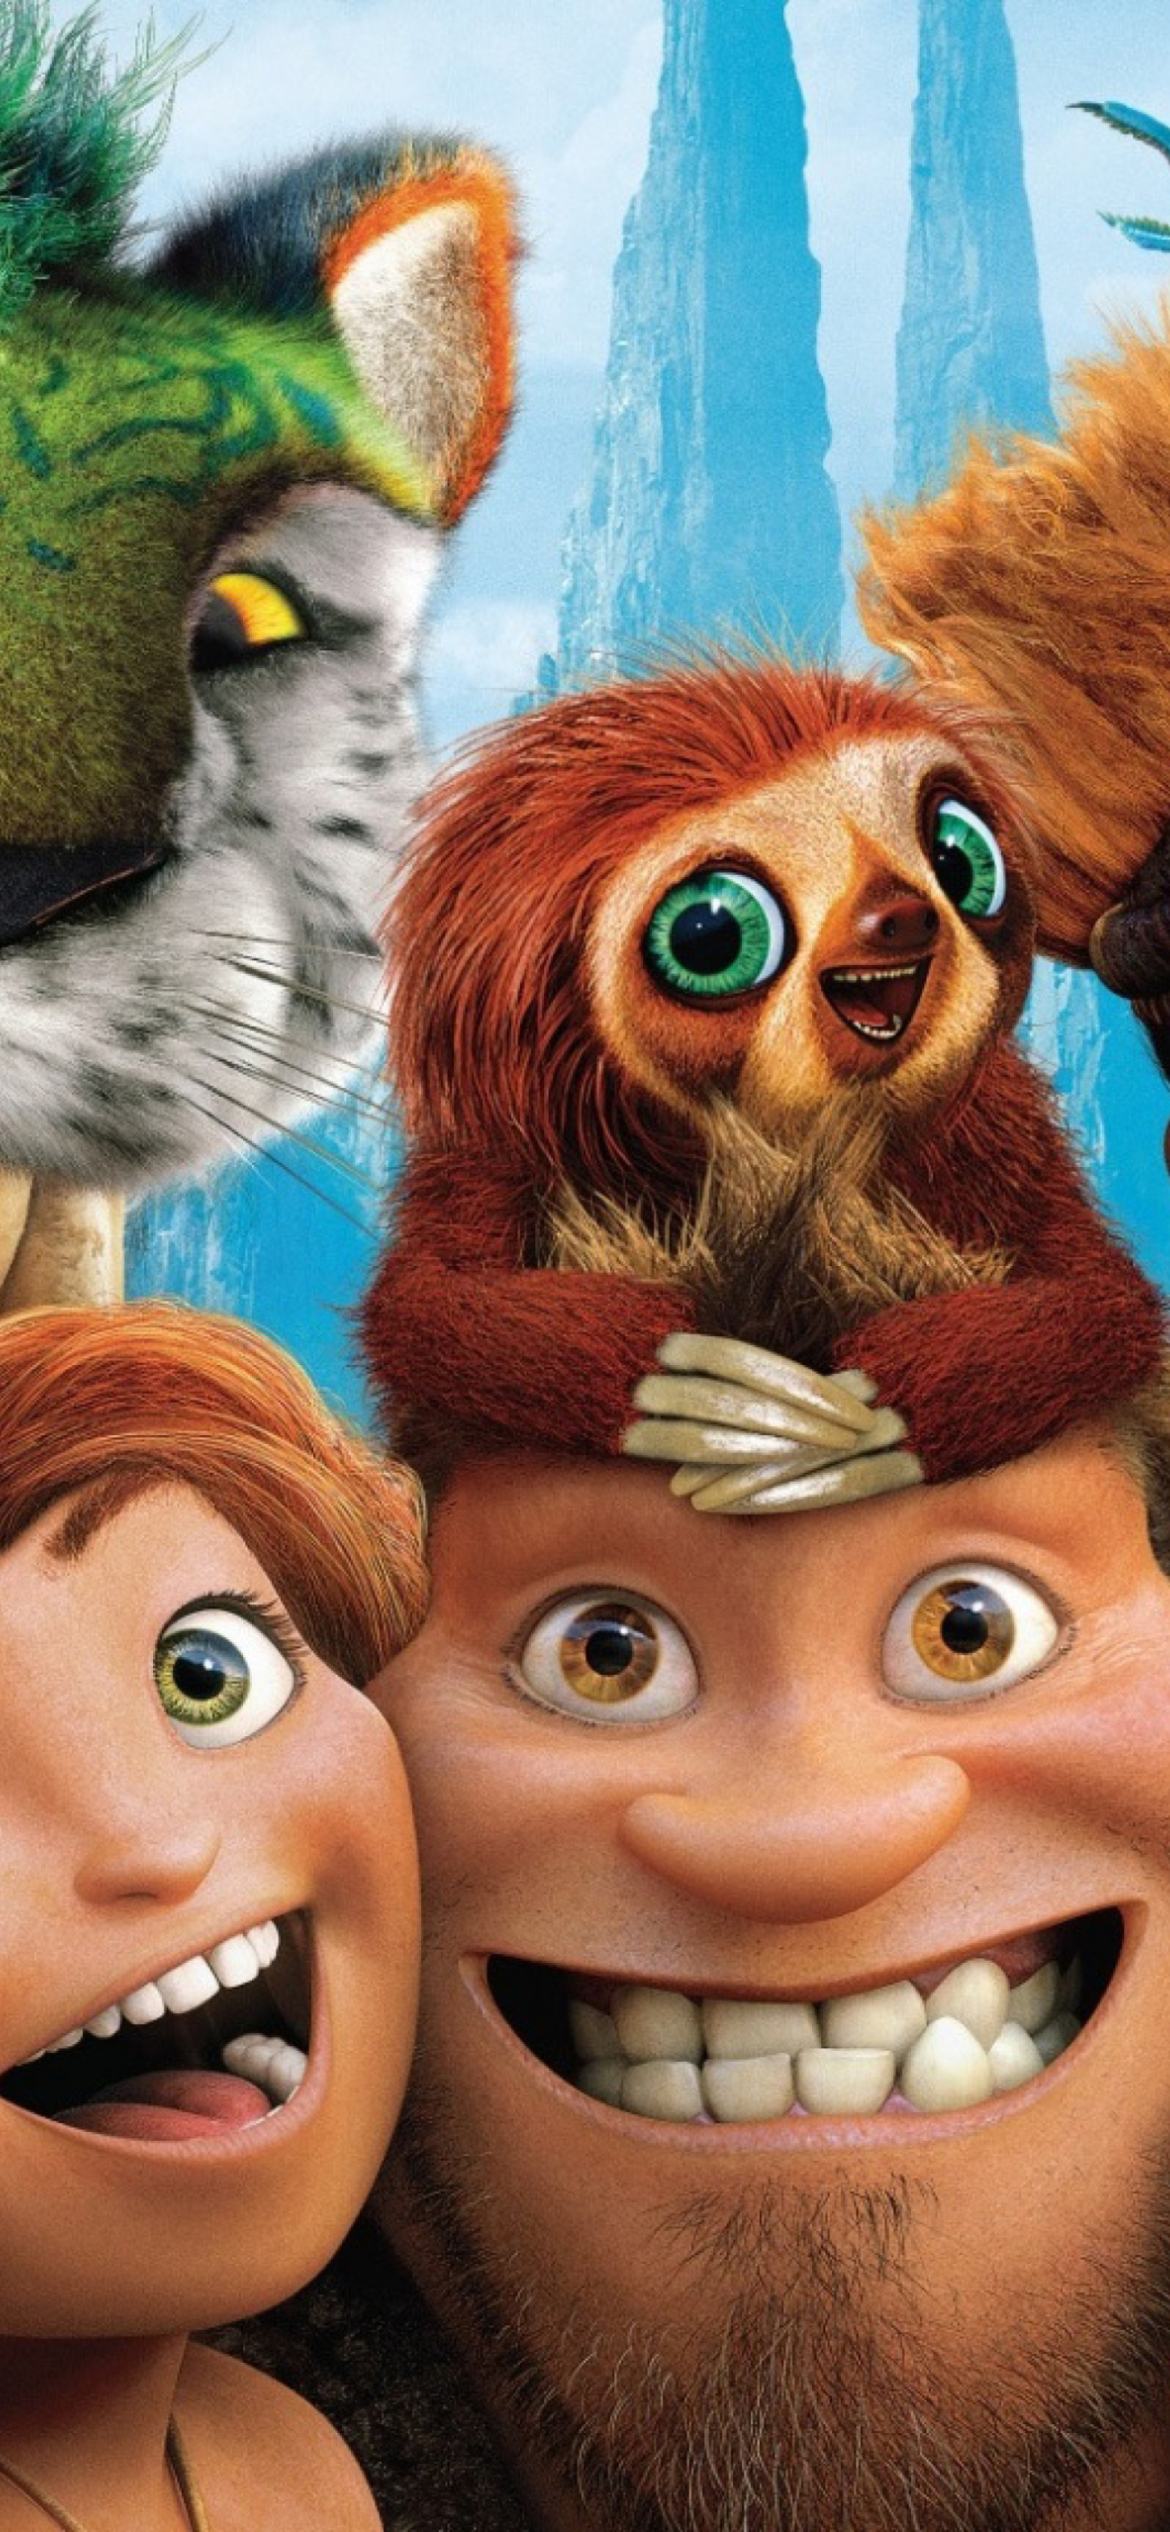 The Croods wallpaper 1170x2532